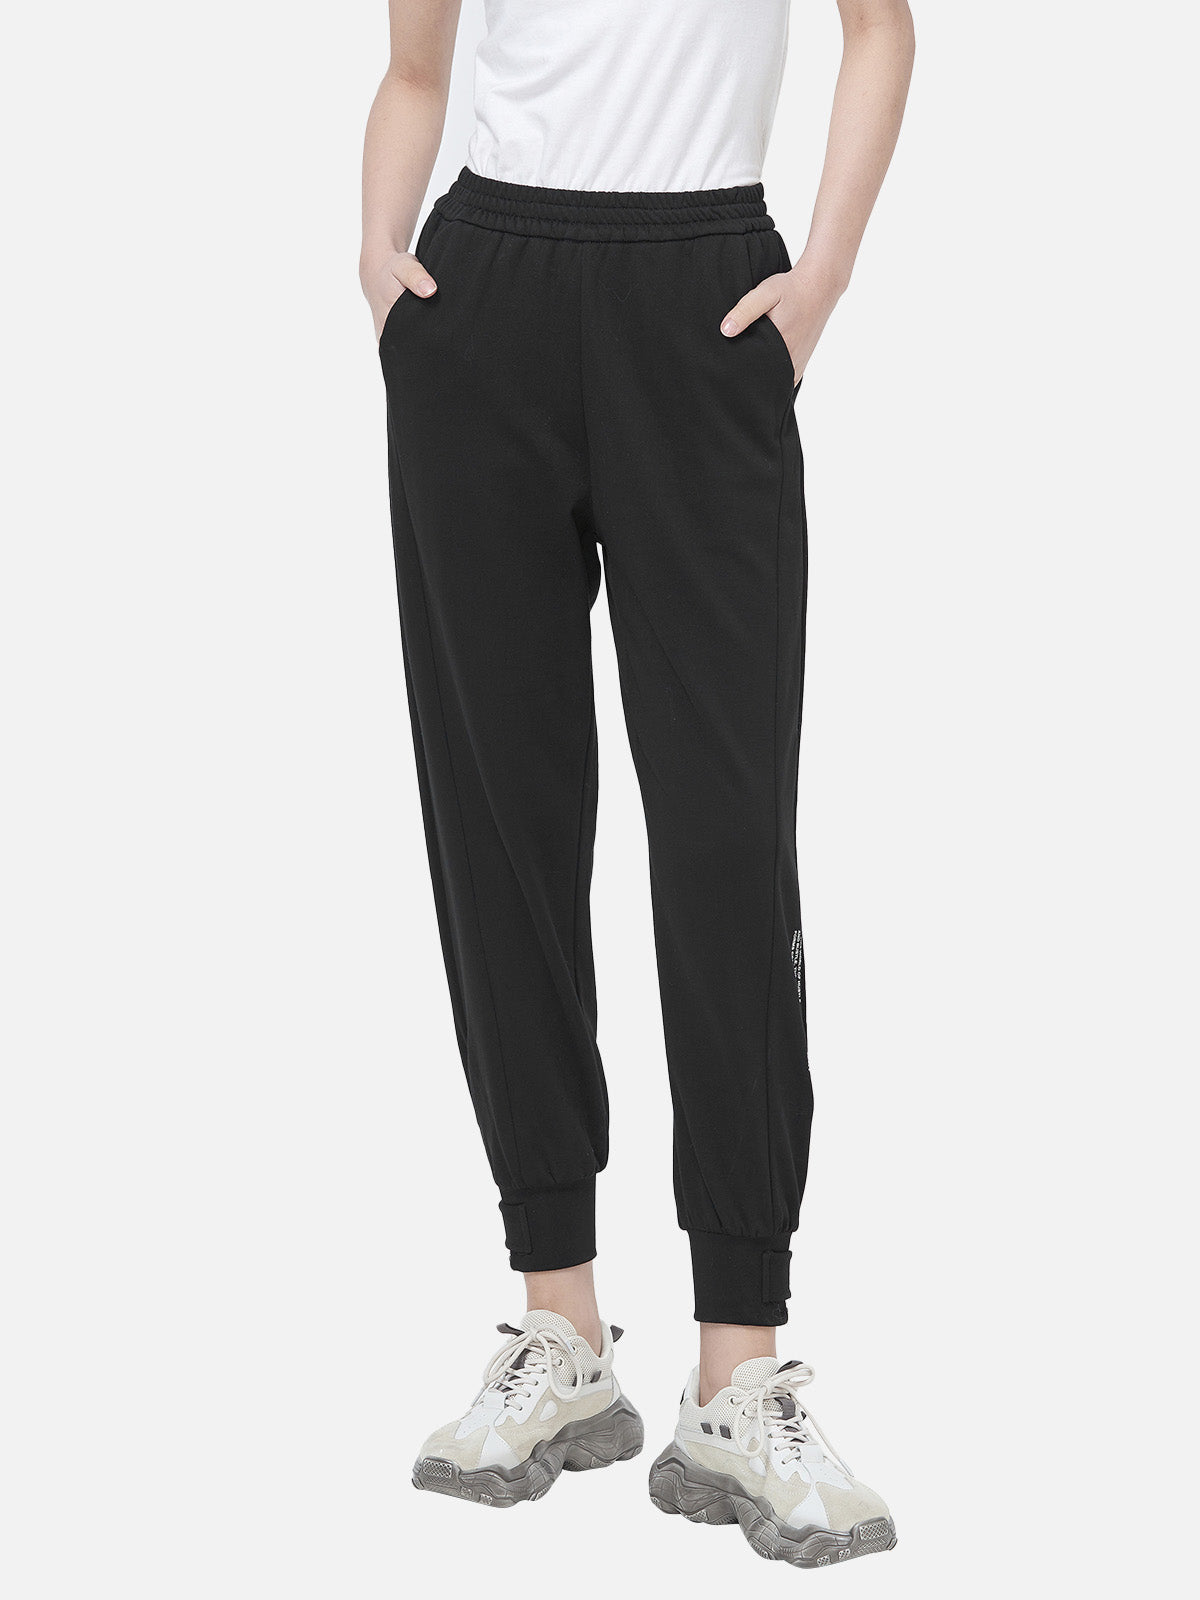 Personality Tight Contrast Color Letter Black Sports Pants